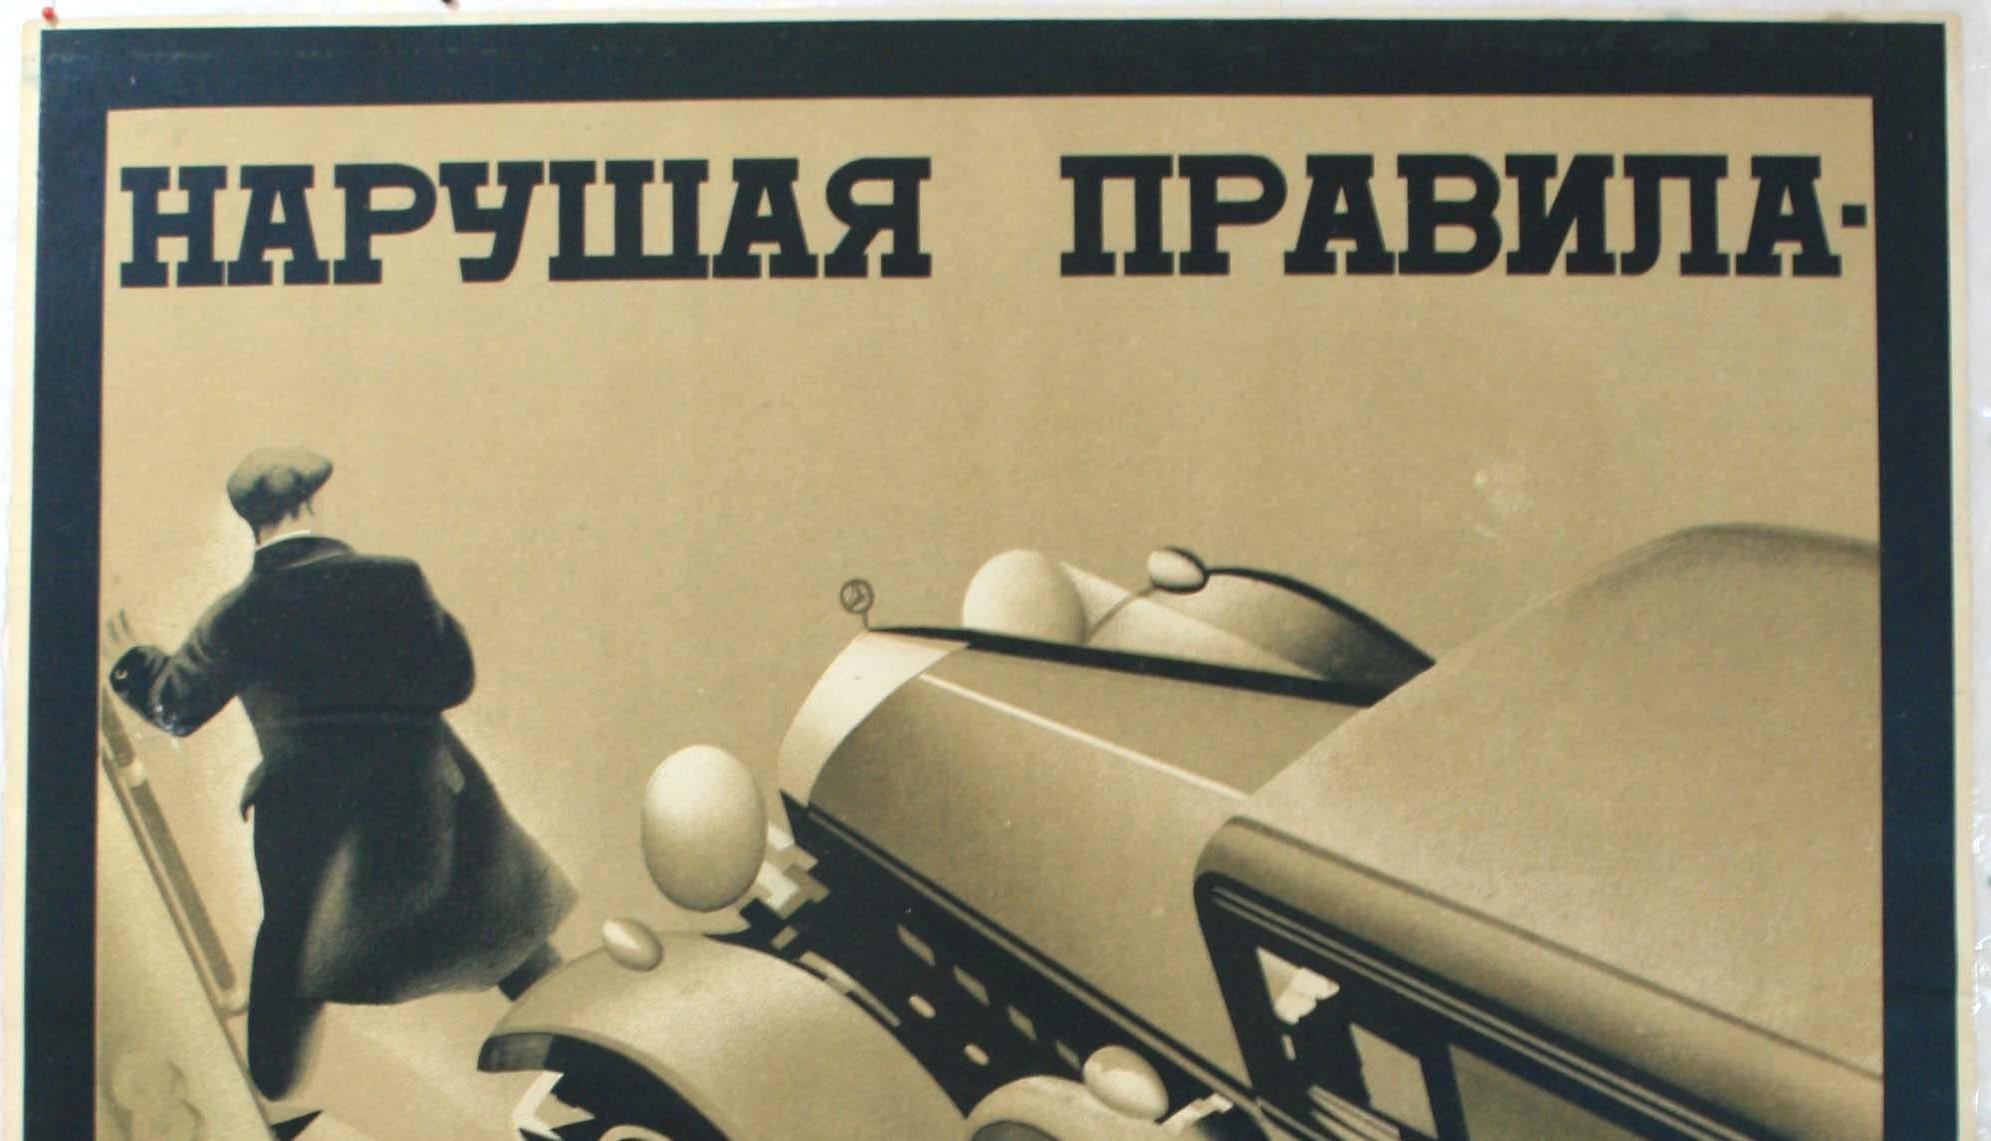 Original vintage Russian avant-garde road safety poster designed by V. Klimashin. Amazingly dynamic image of a careless tram rider jumping off in front of a speeding Mercedes Benz car with a smaller image of an ambulance racing towards the viewer